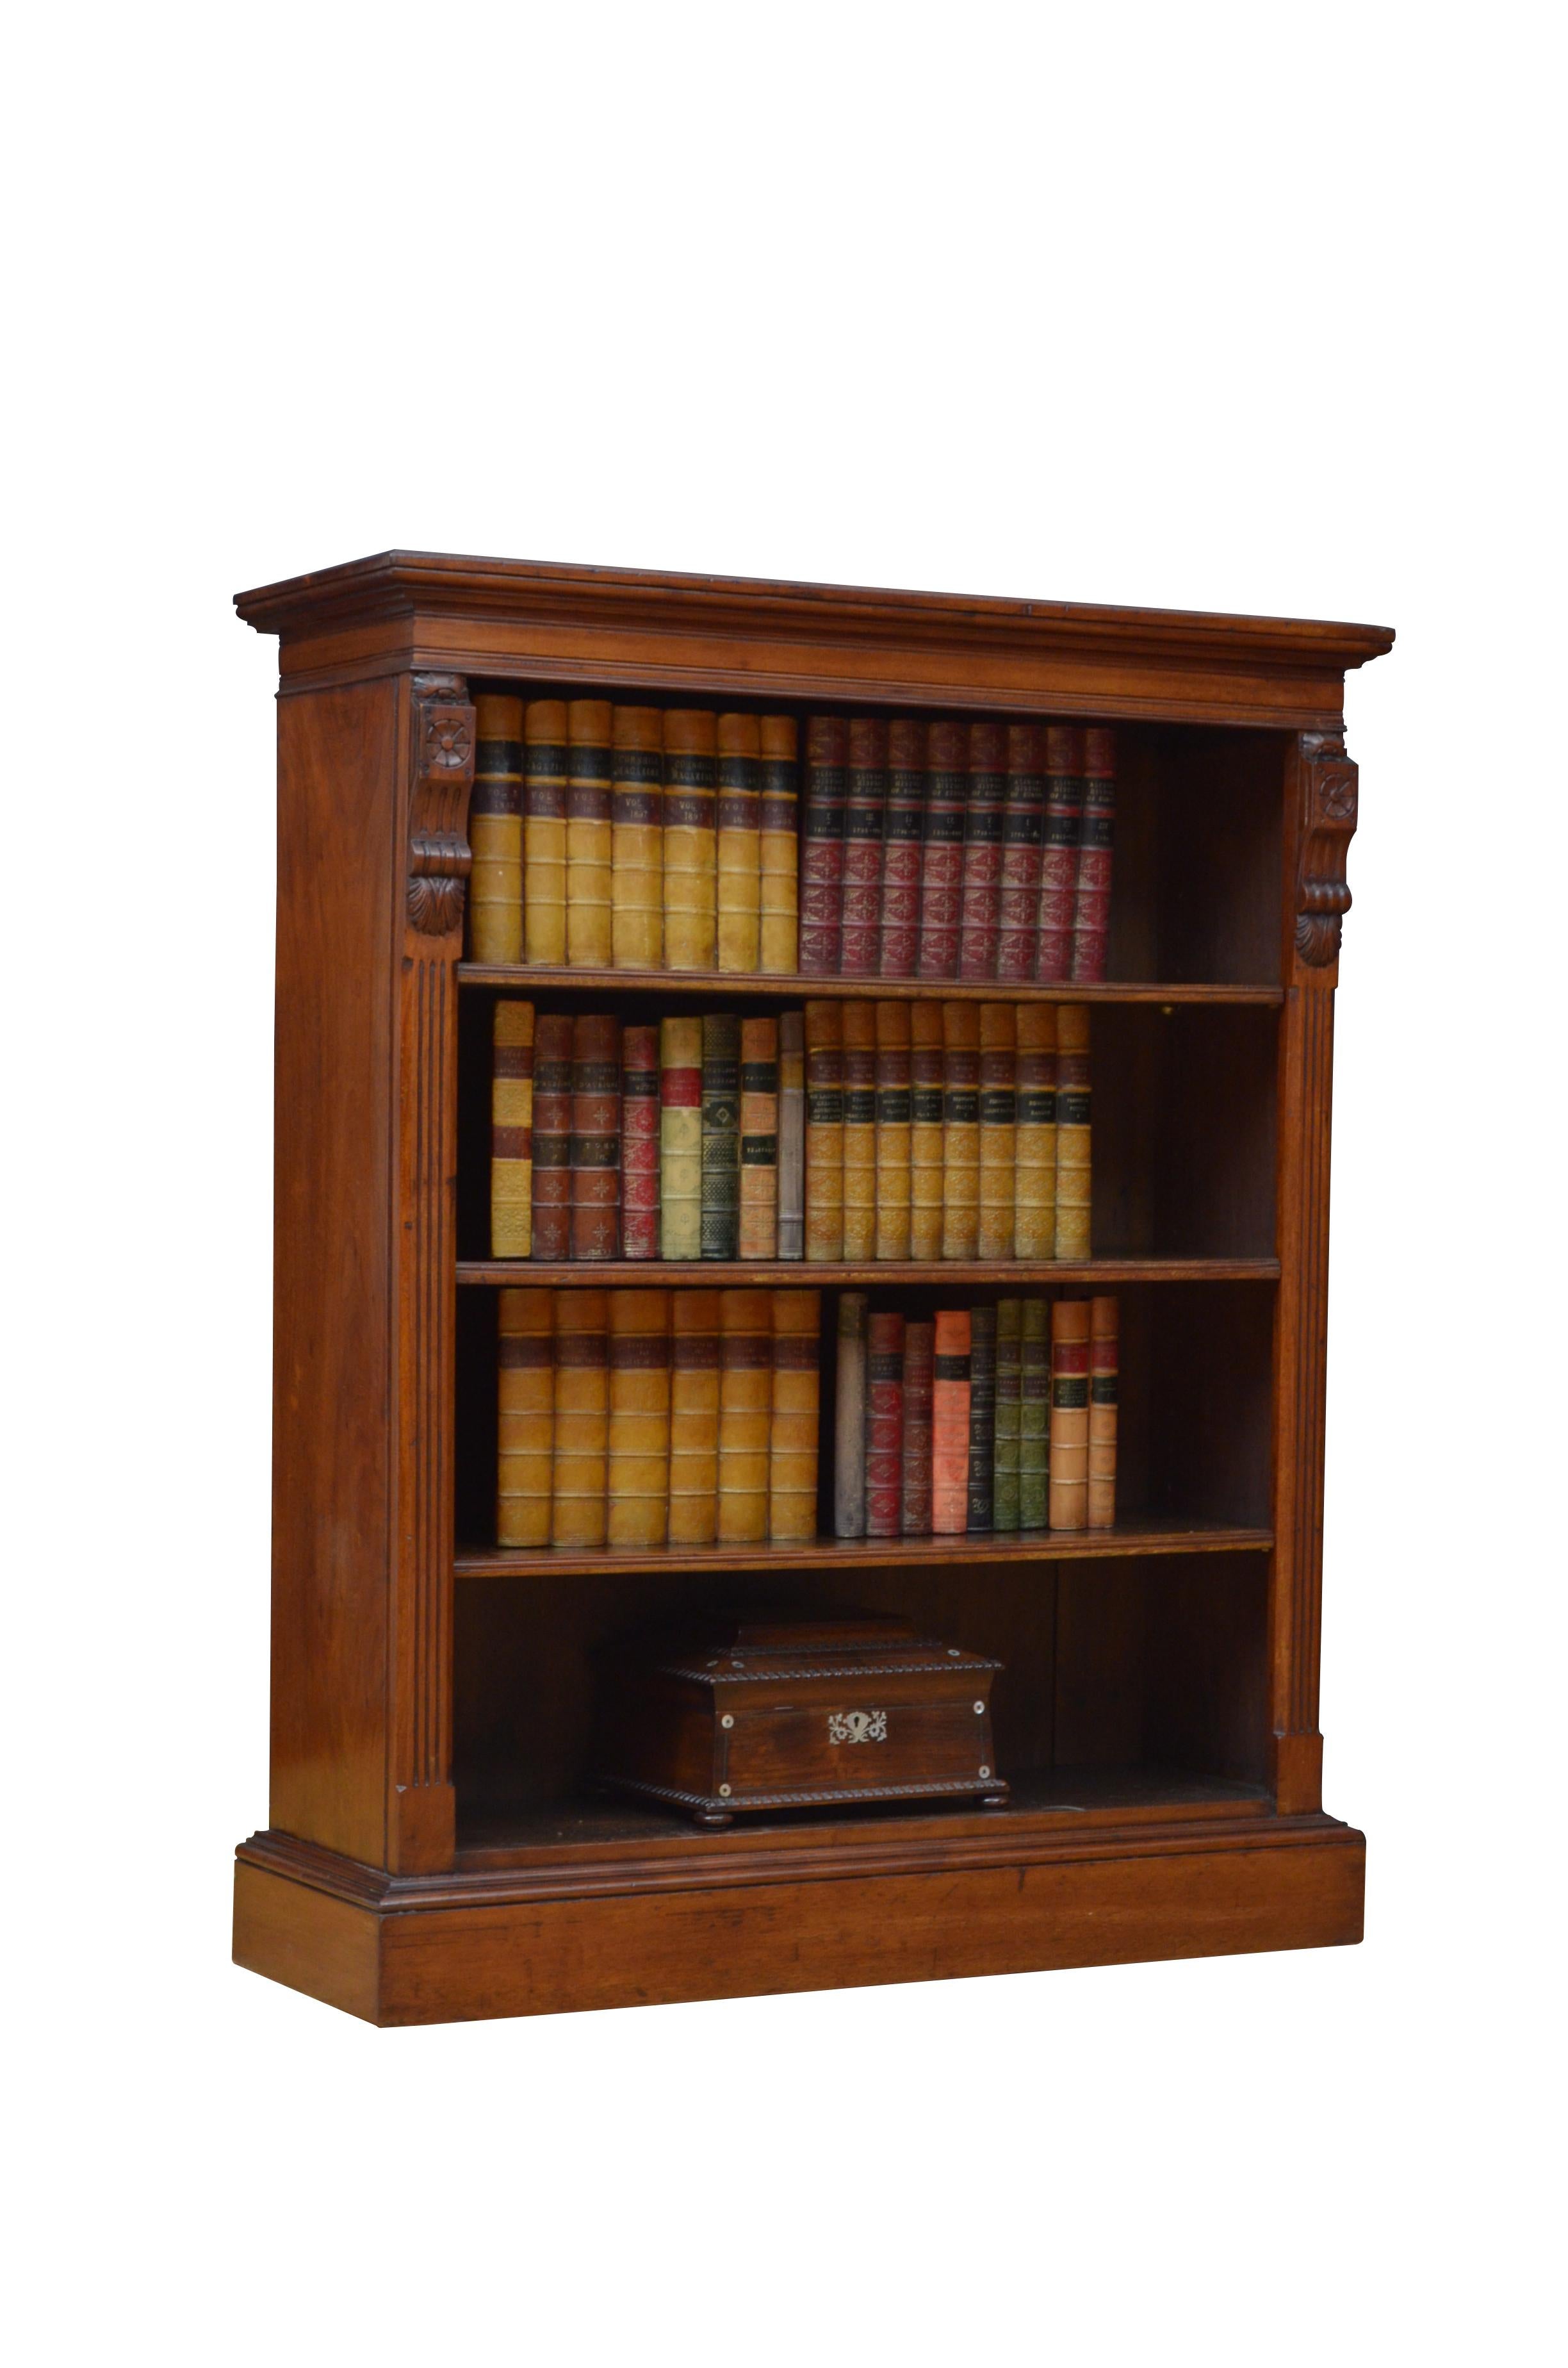 0587 Attractive Victorian open bookcase in solid walnut, having figured walnut top, moulded frieze and three height adjustable shelves, all flanked by fine drop carving and reeded pilasters, standing on moulded plinth base. This antique bookcase